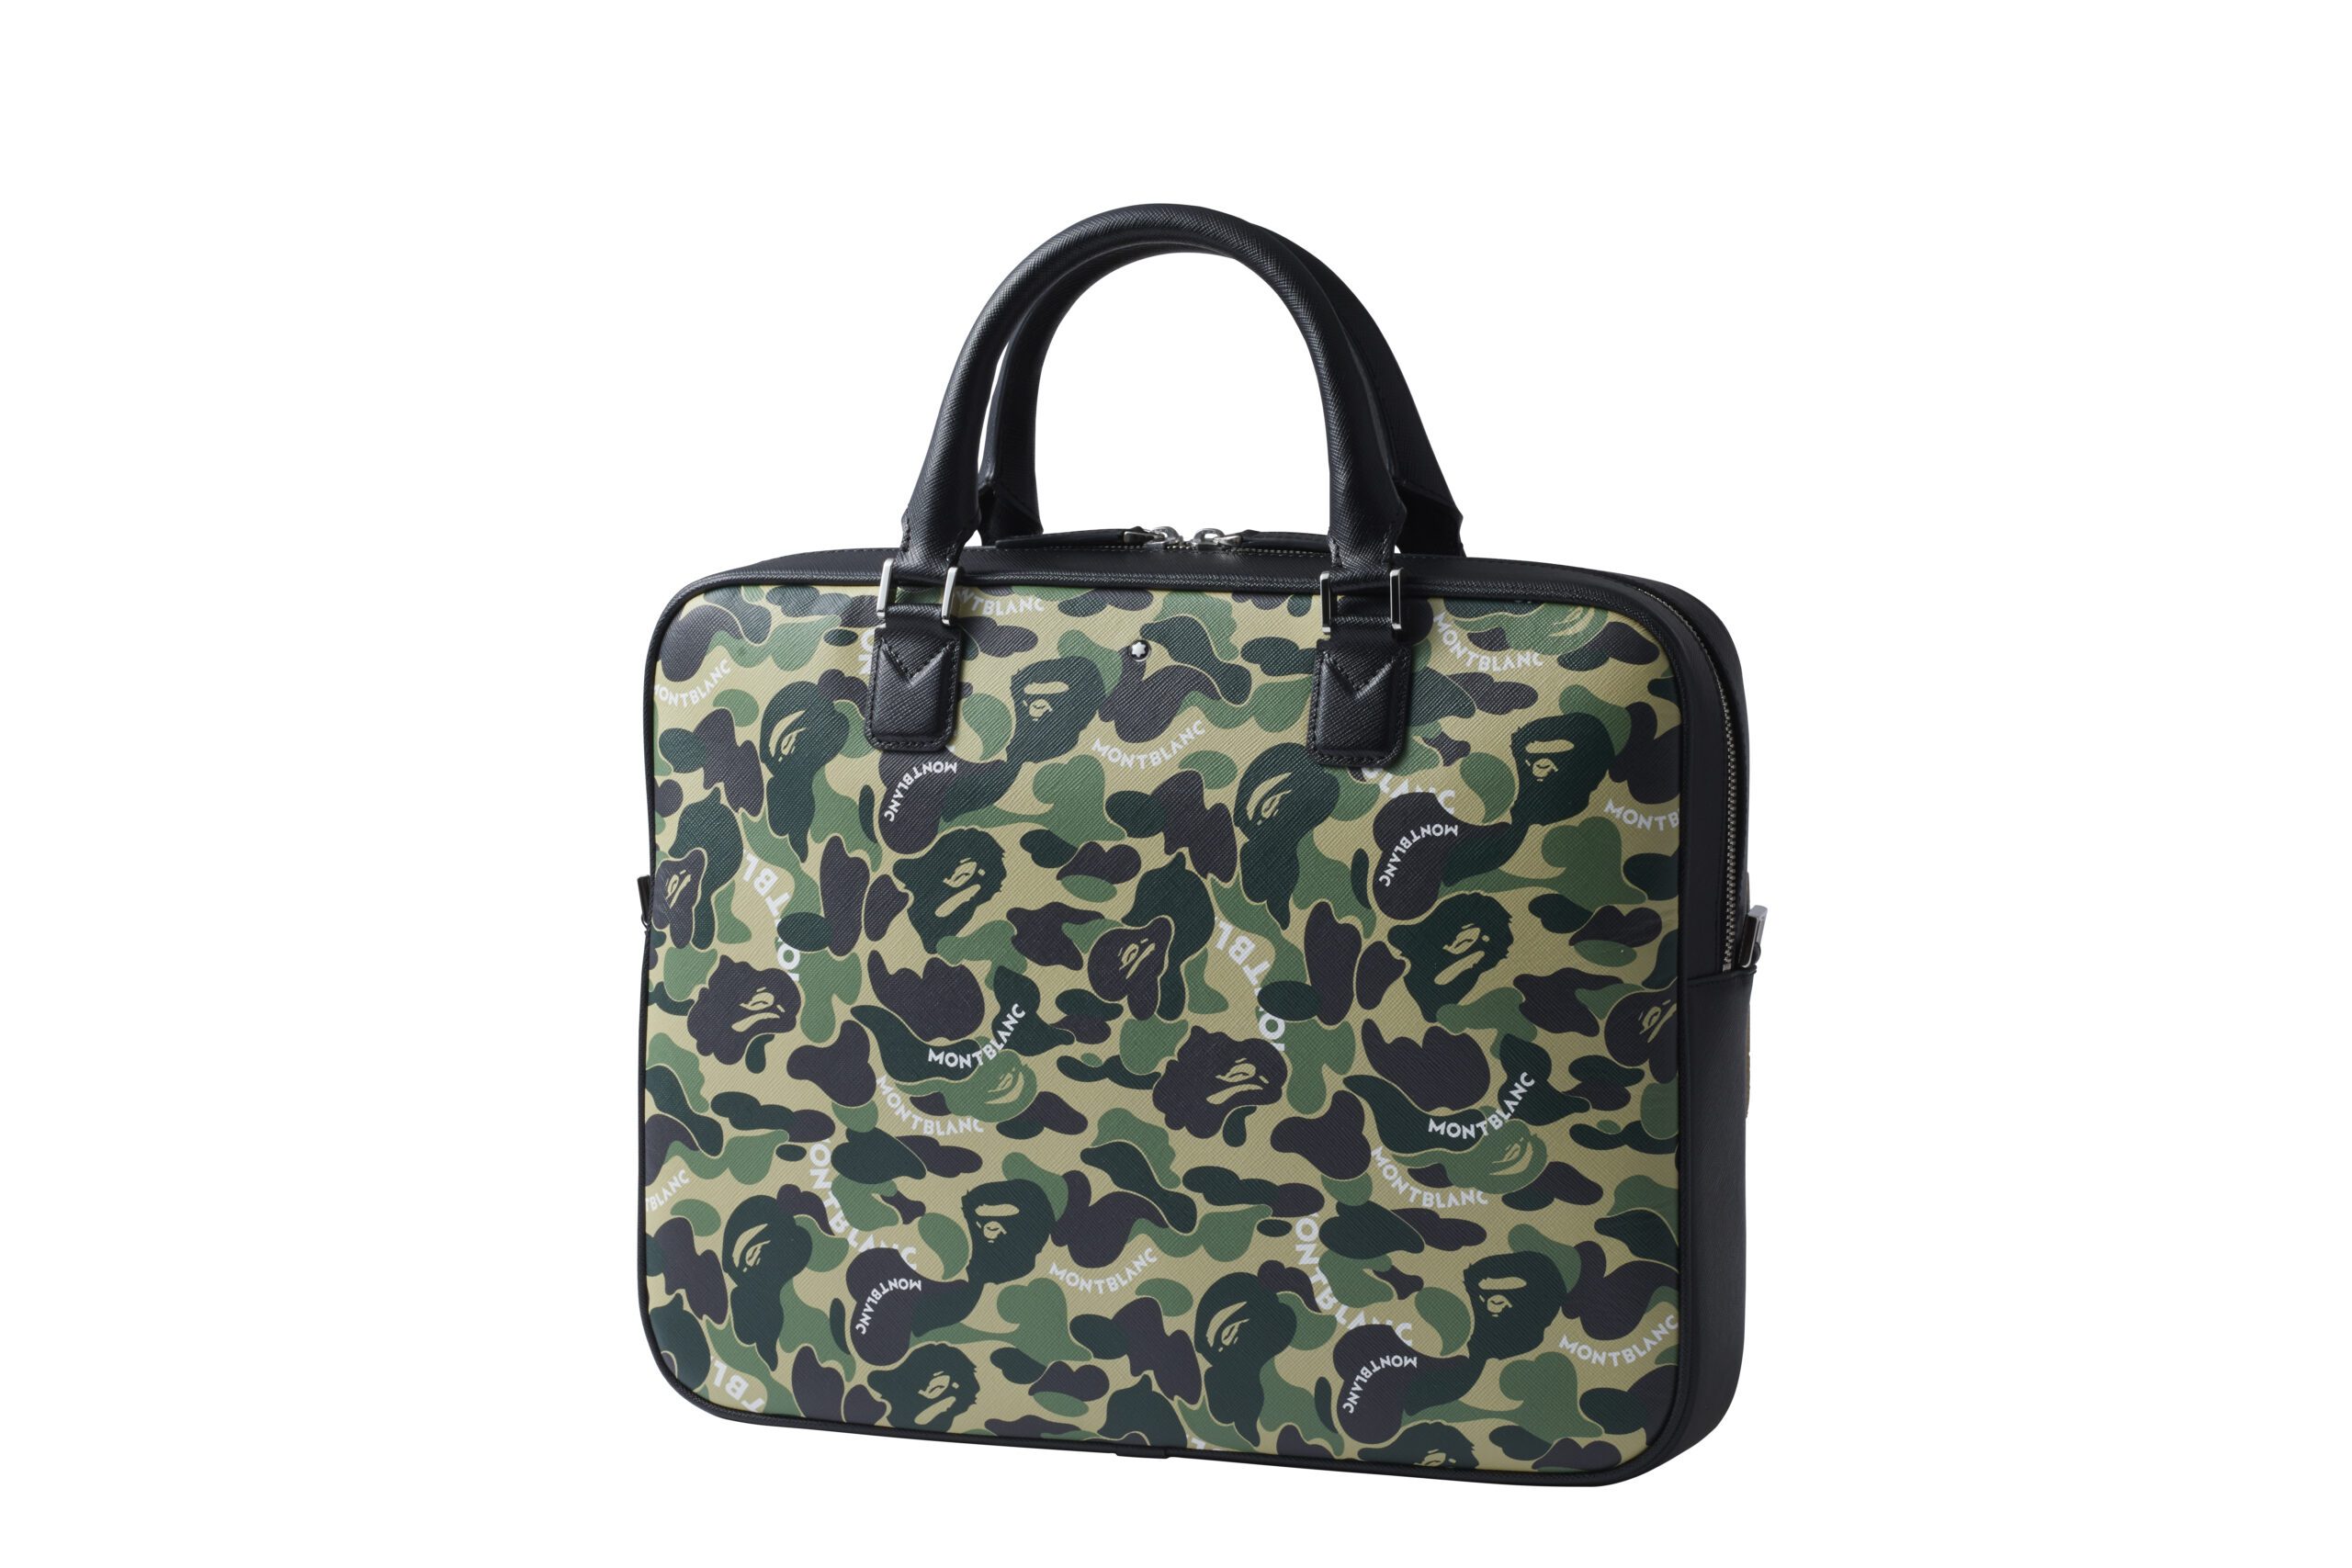 METCHA  BAPE x Montblanc to launch collab of luxe leather goods.